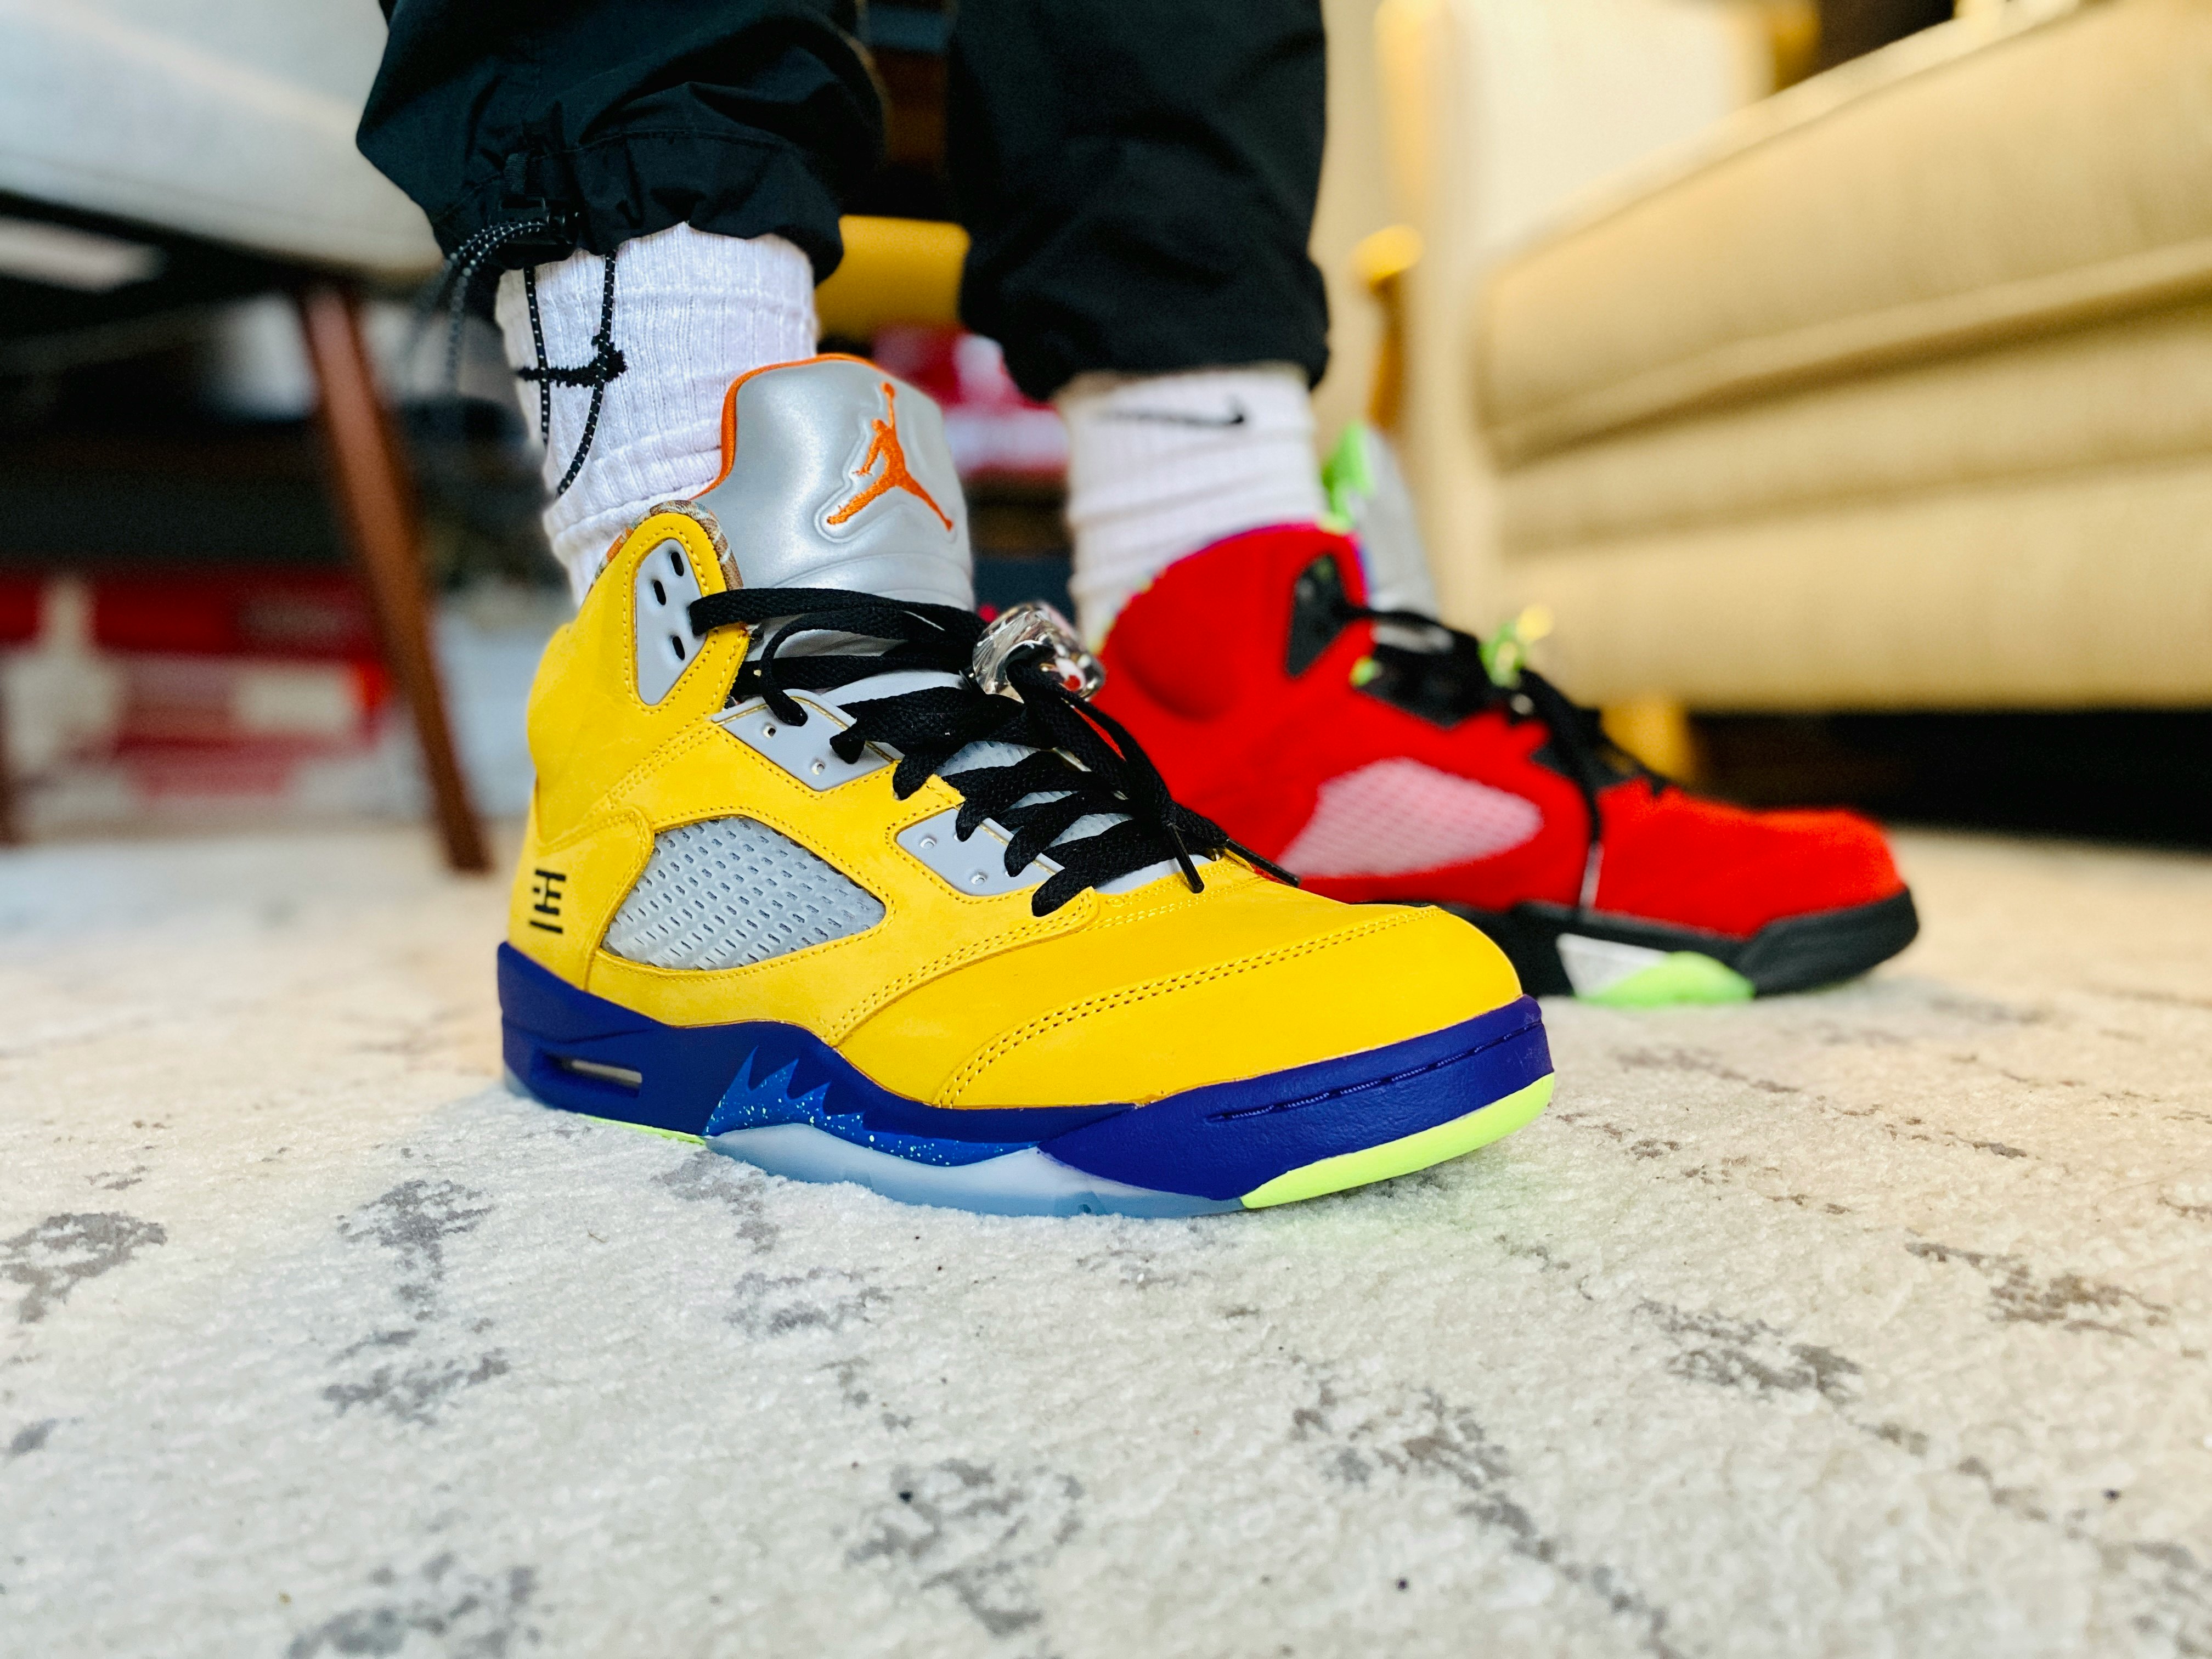 Wearing the Jordan 5 'What The': A mix 